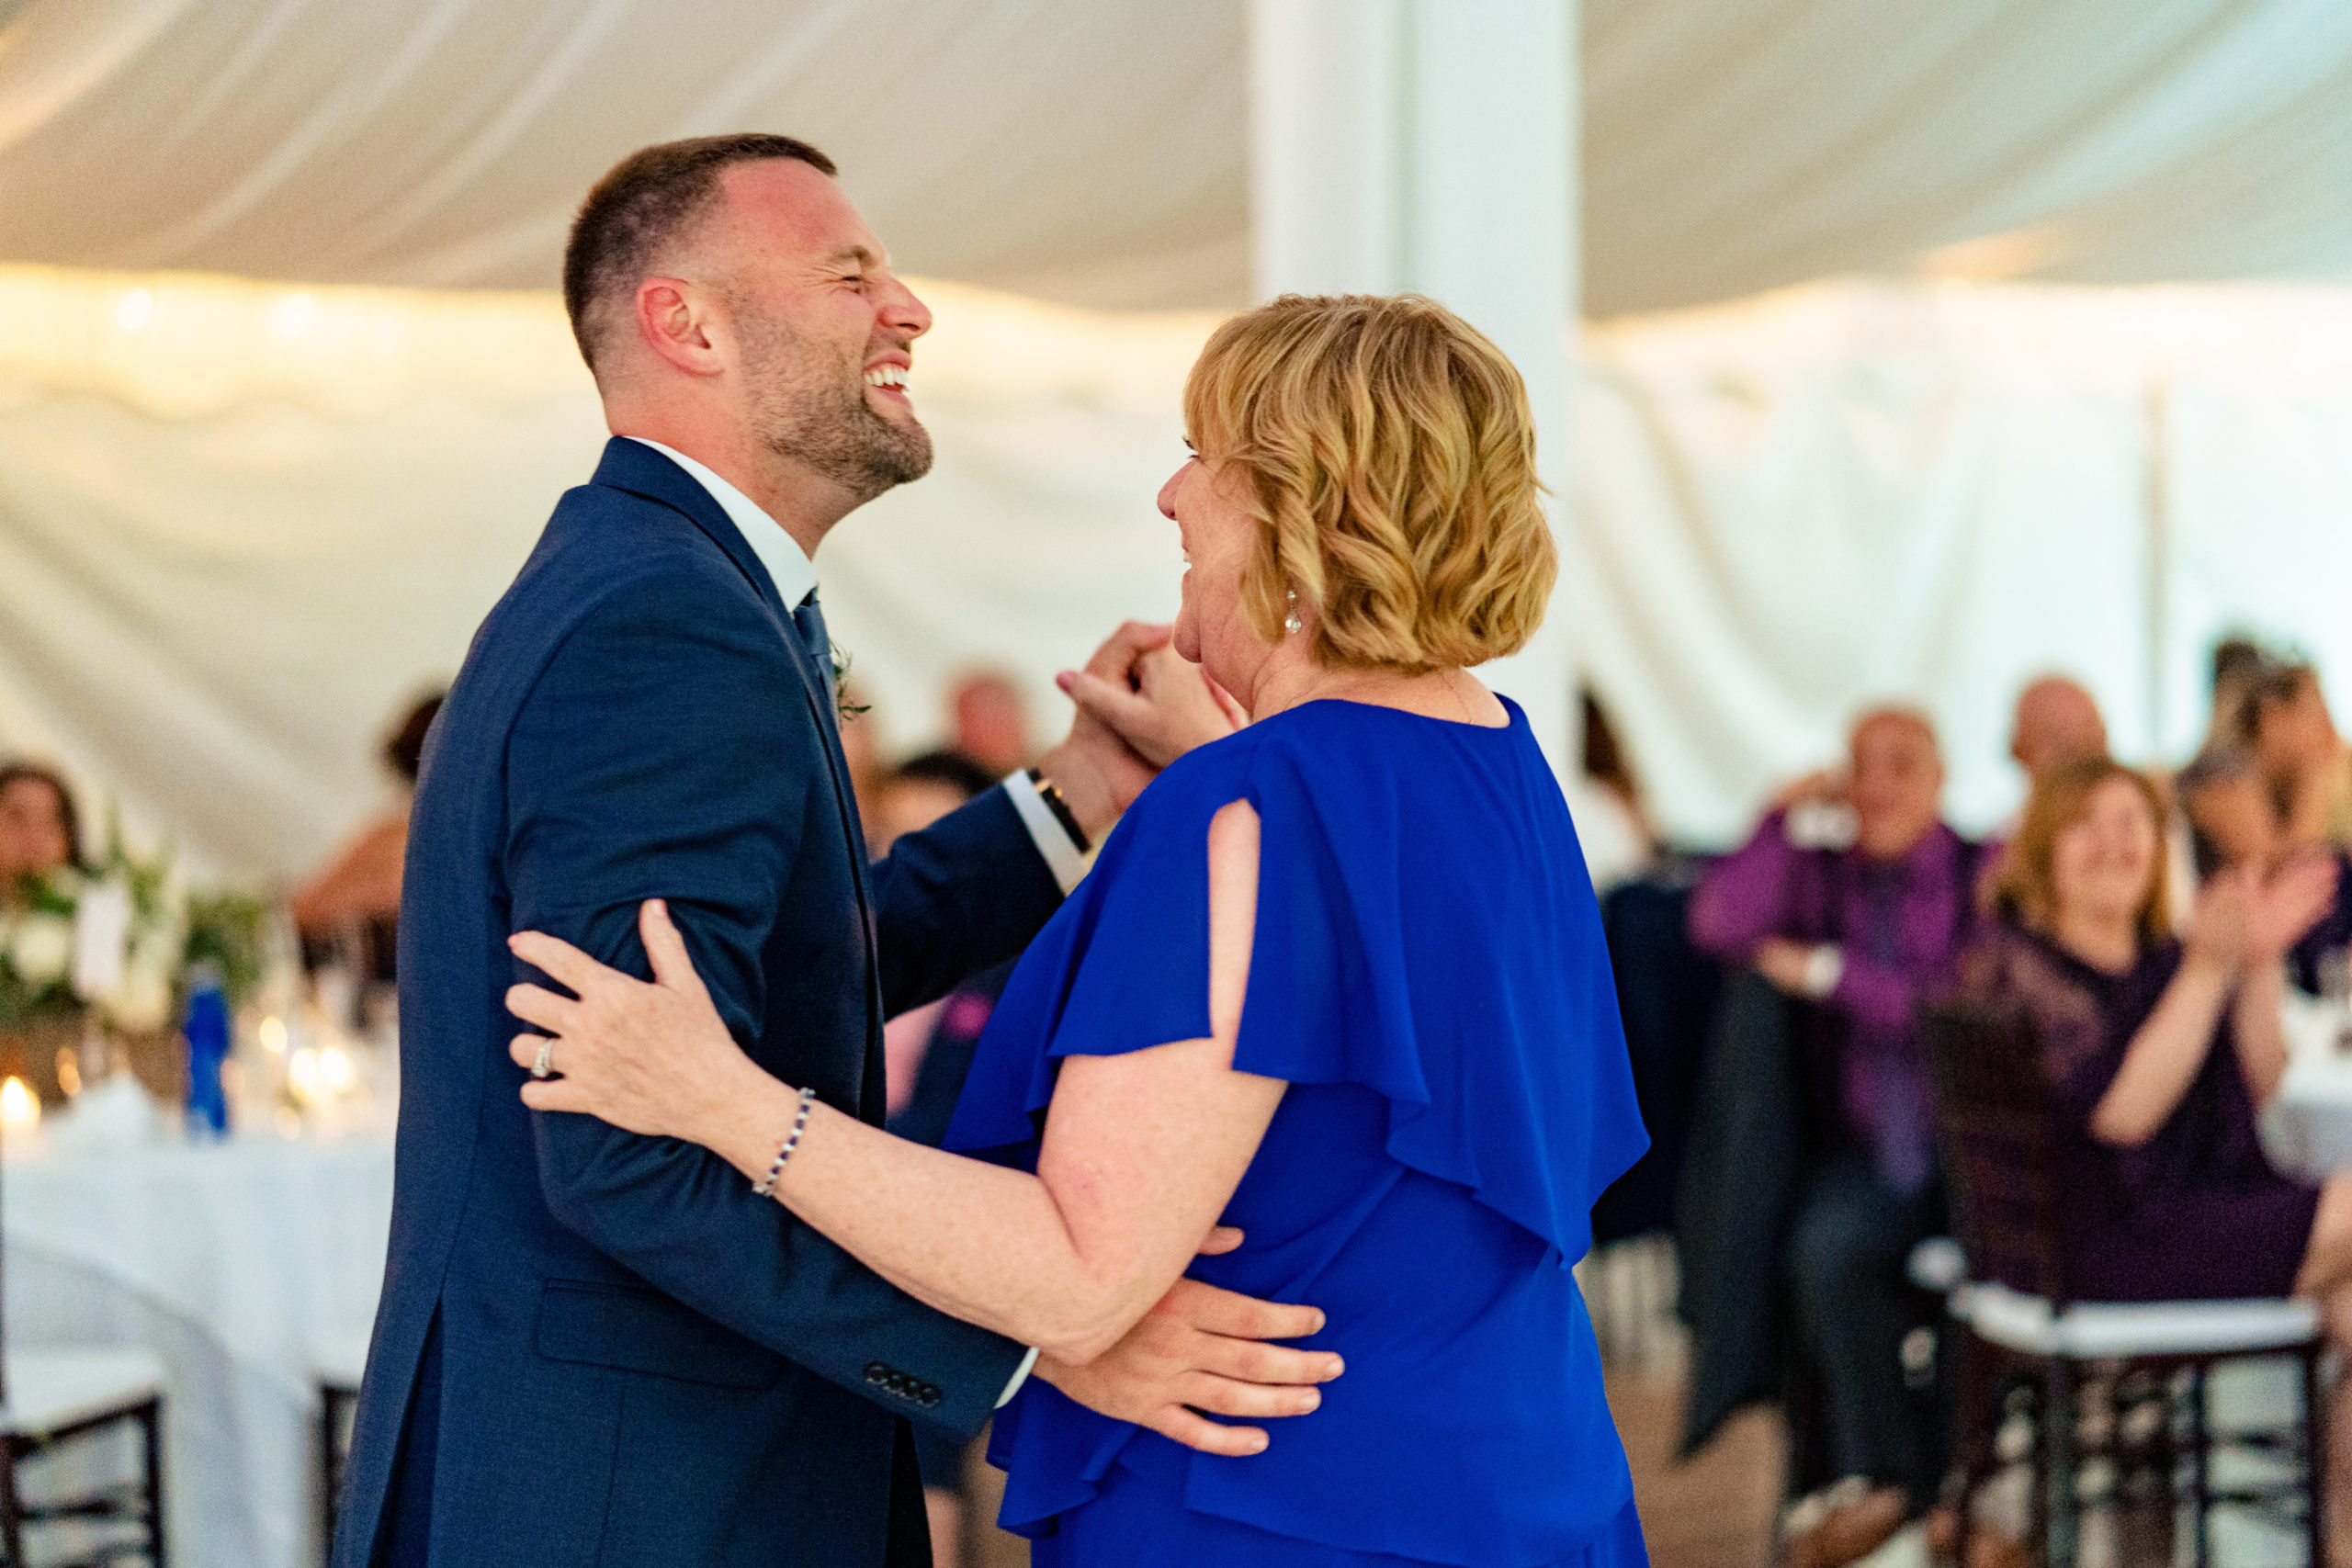 Groom and mother dancing at wedding reception